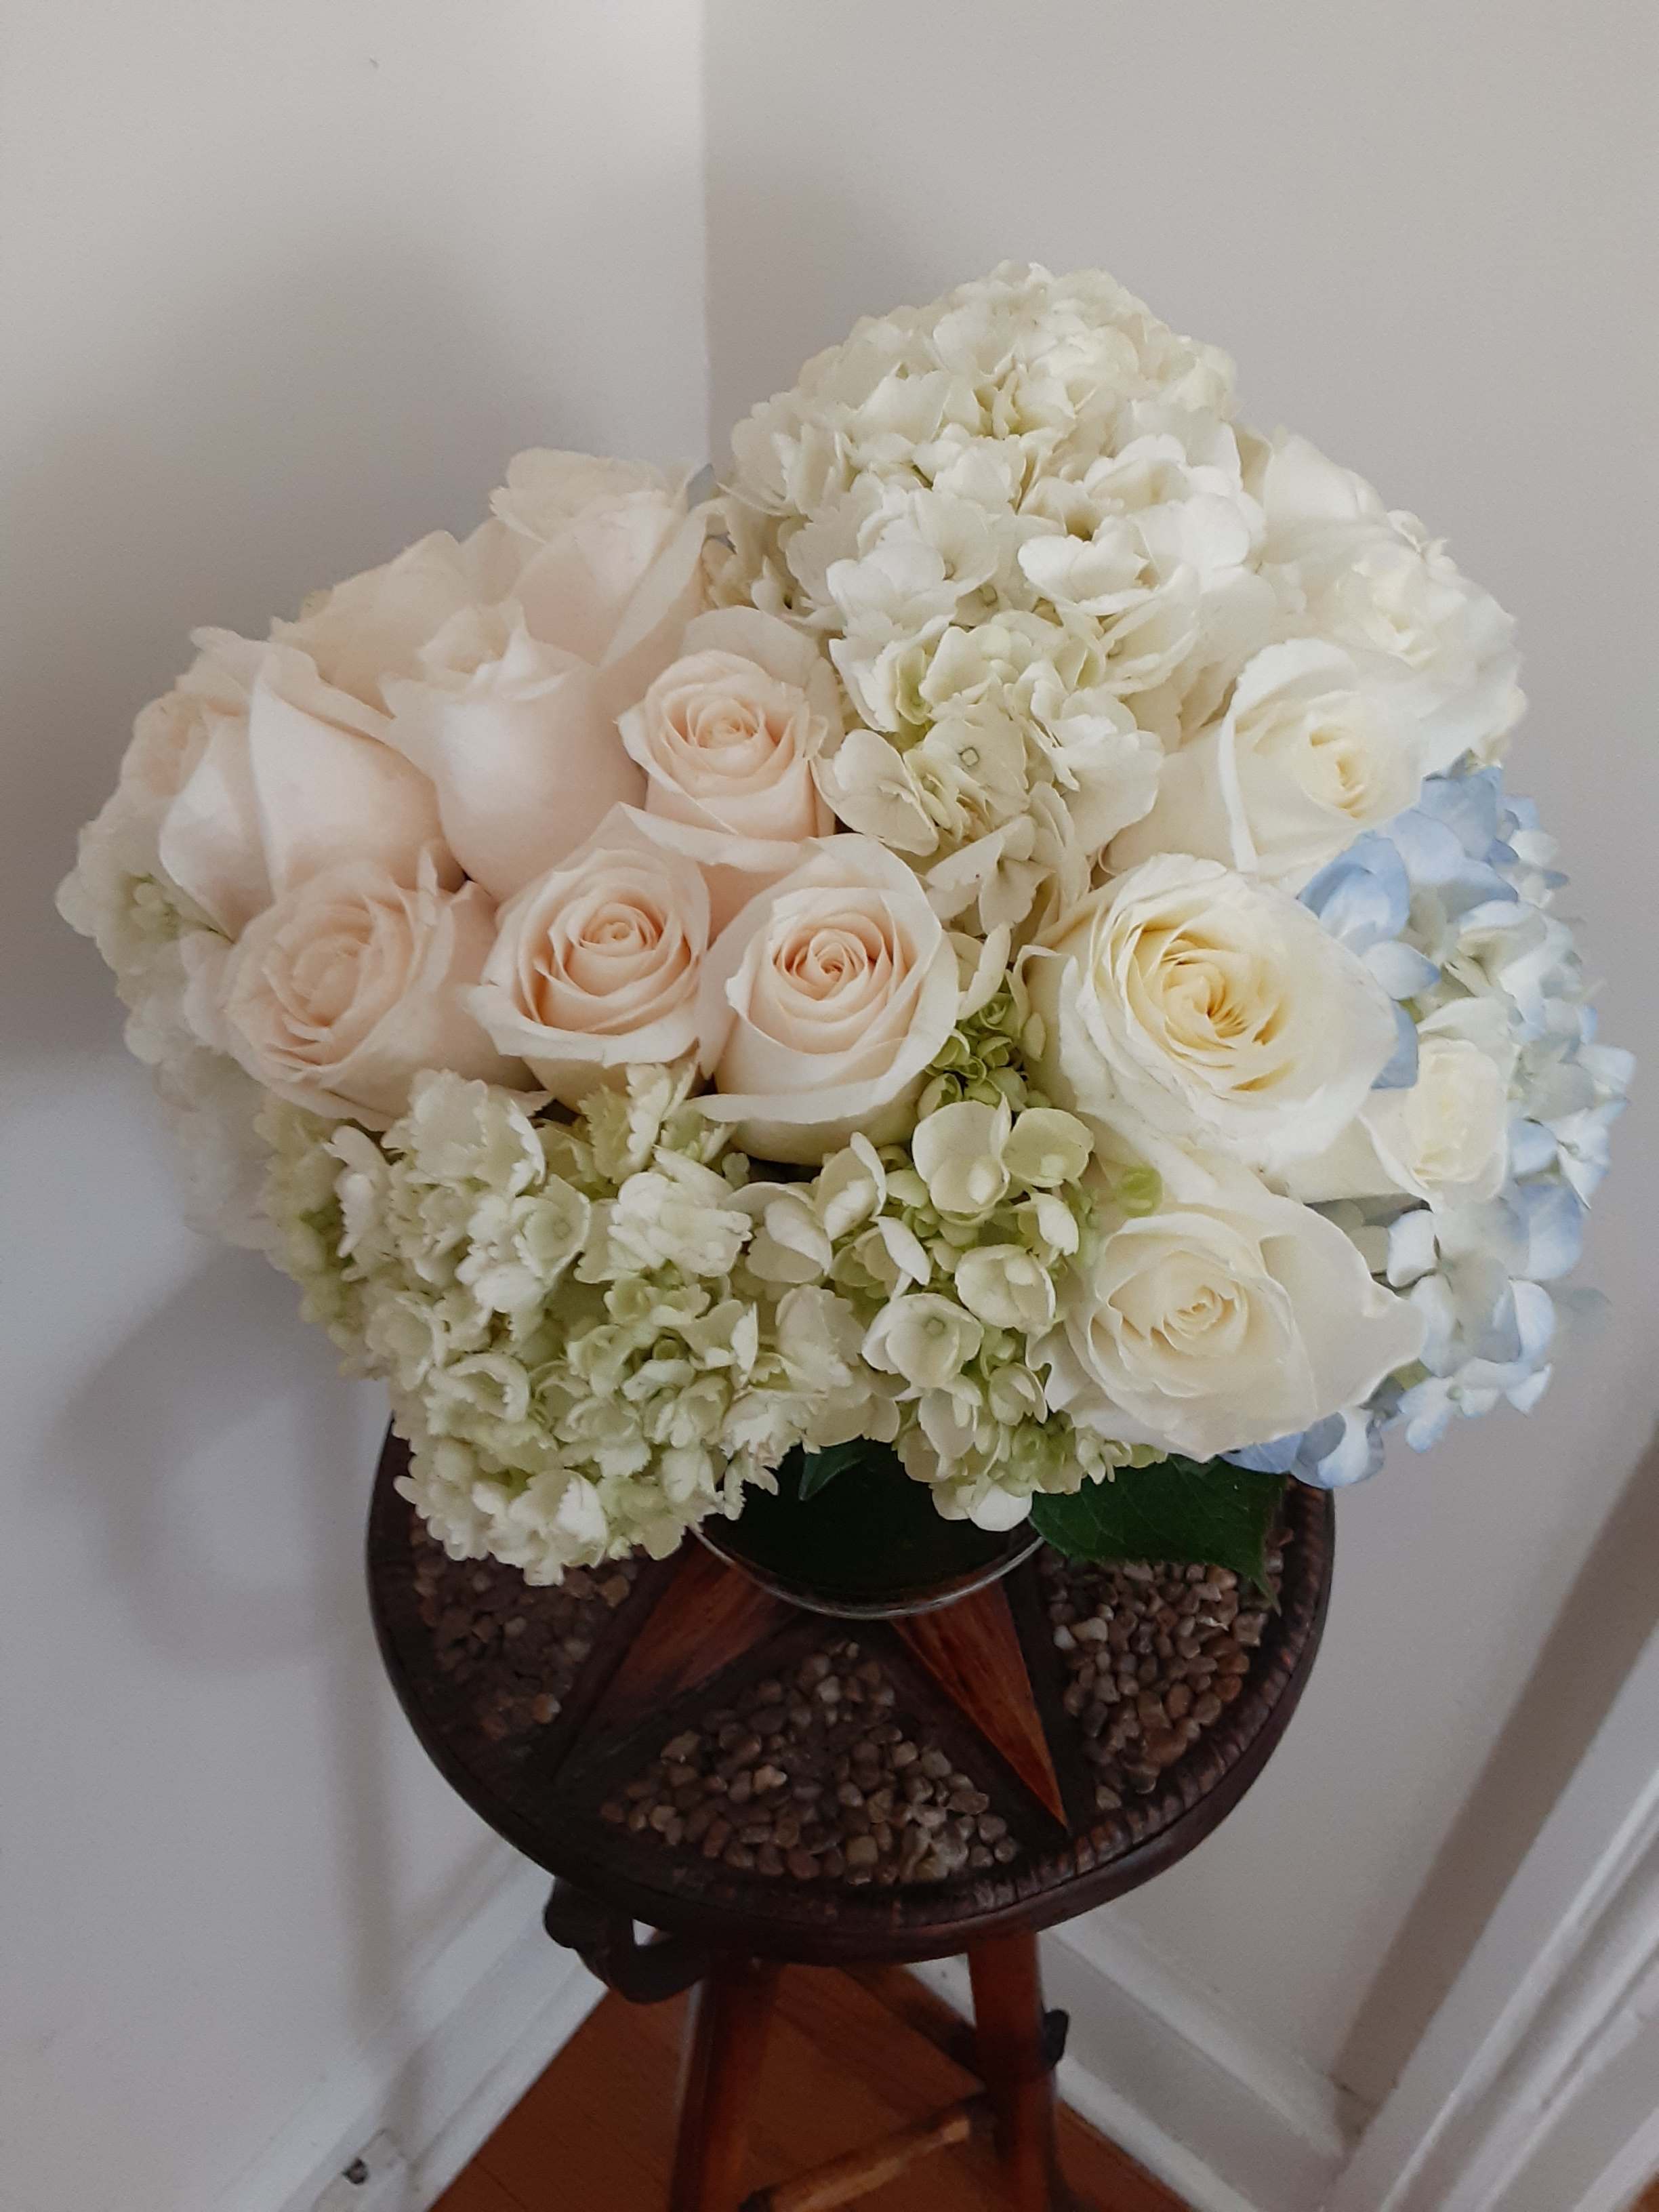 creme roses and hydrangeas - hydrangeas and roses in cylinder vase